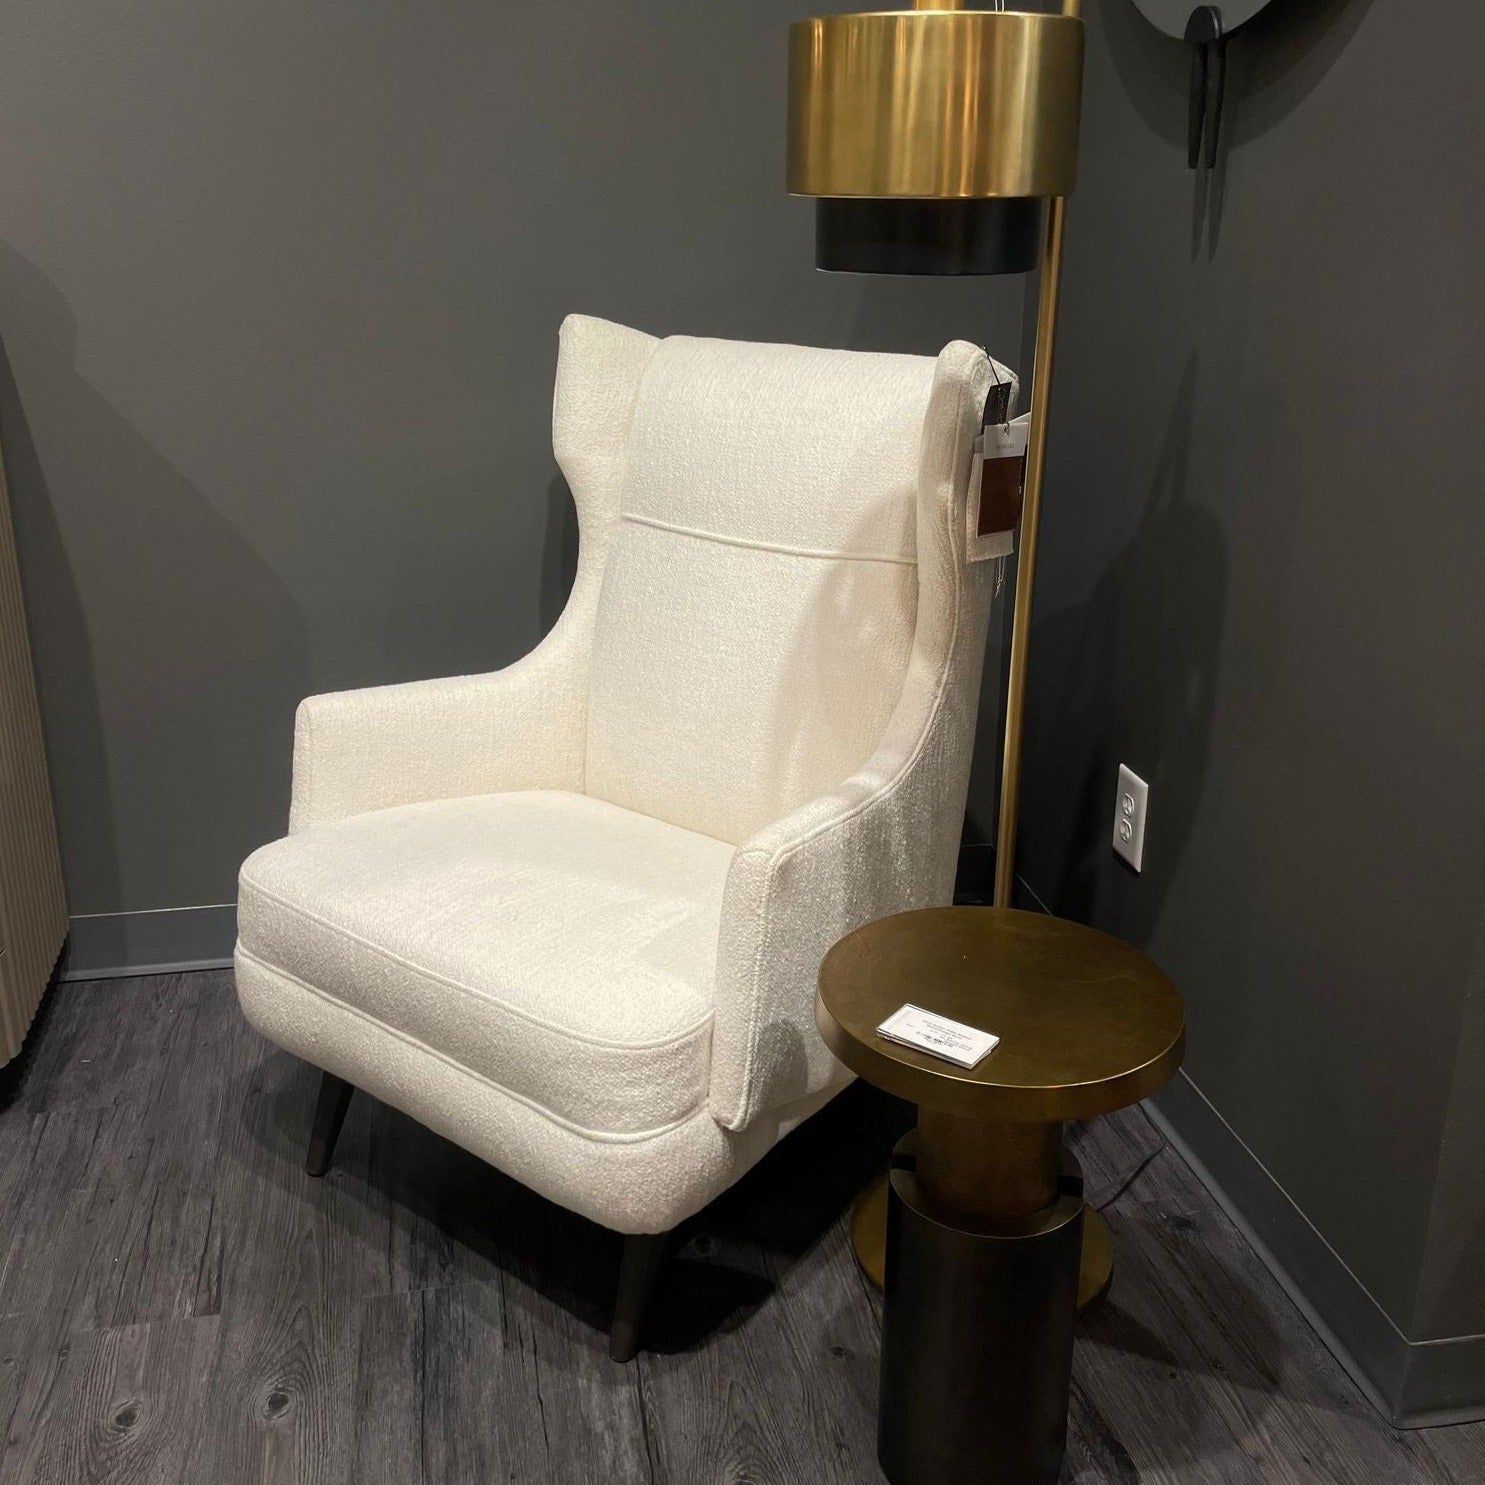 arteriors budelli wing chair market